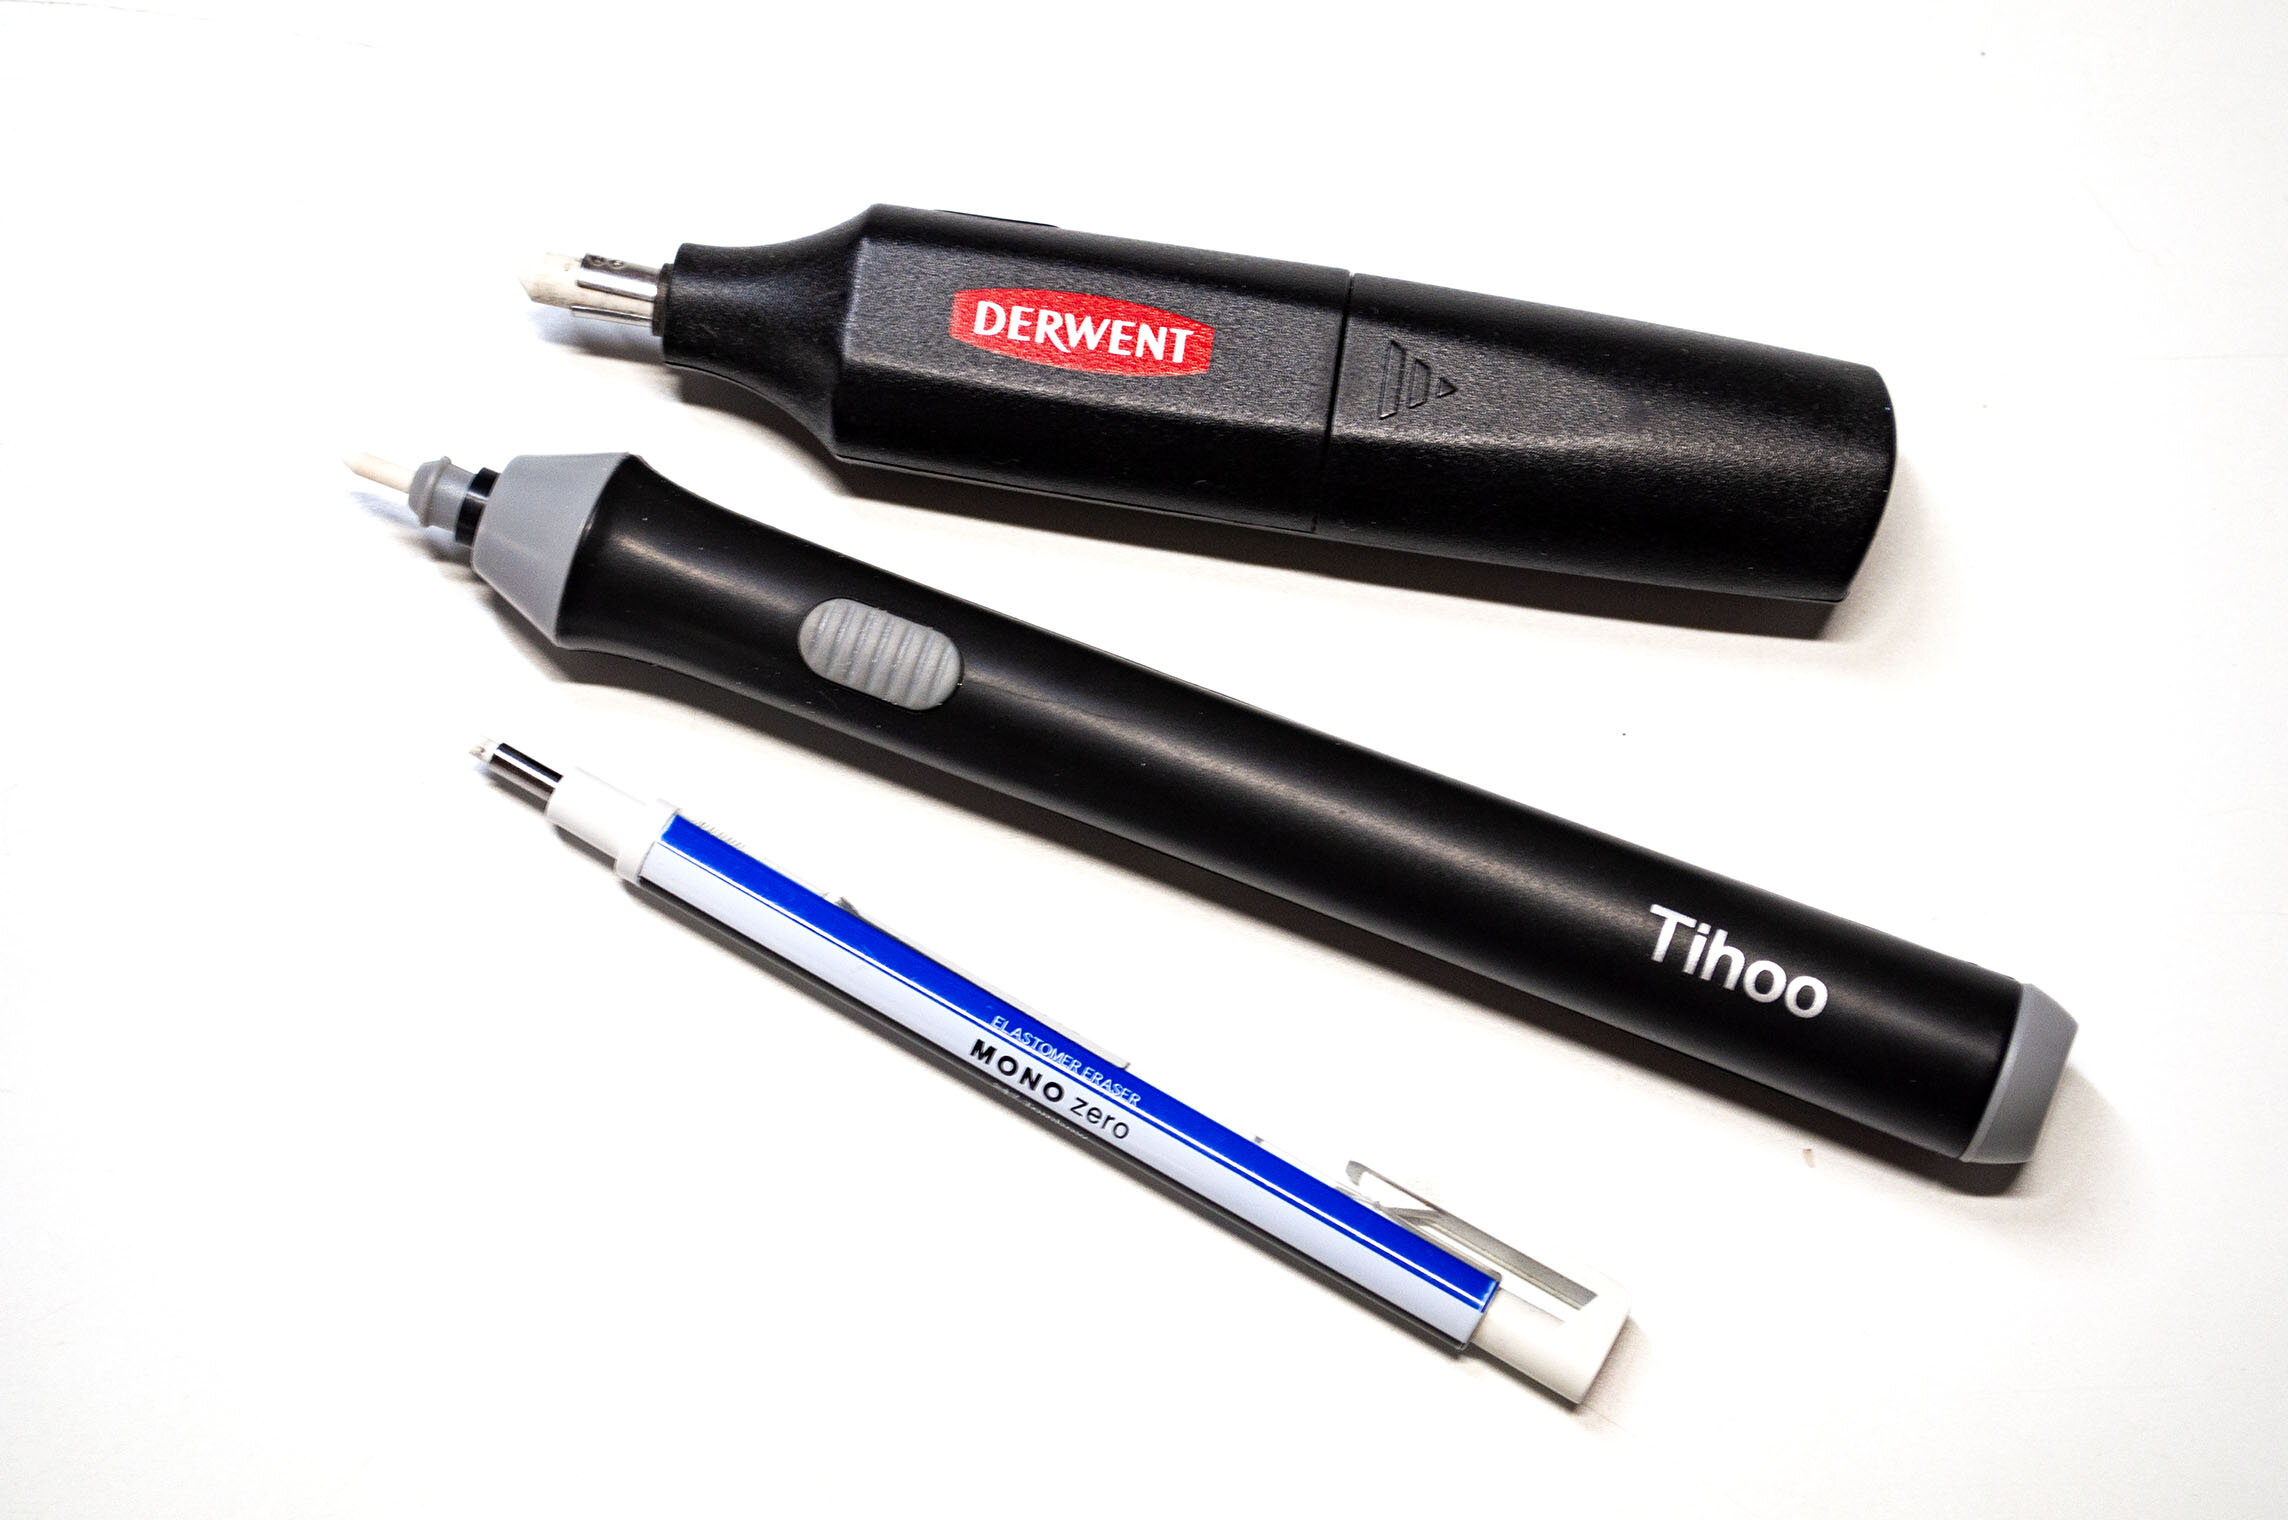 Rechargeable Electric Eraser - Tenwin